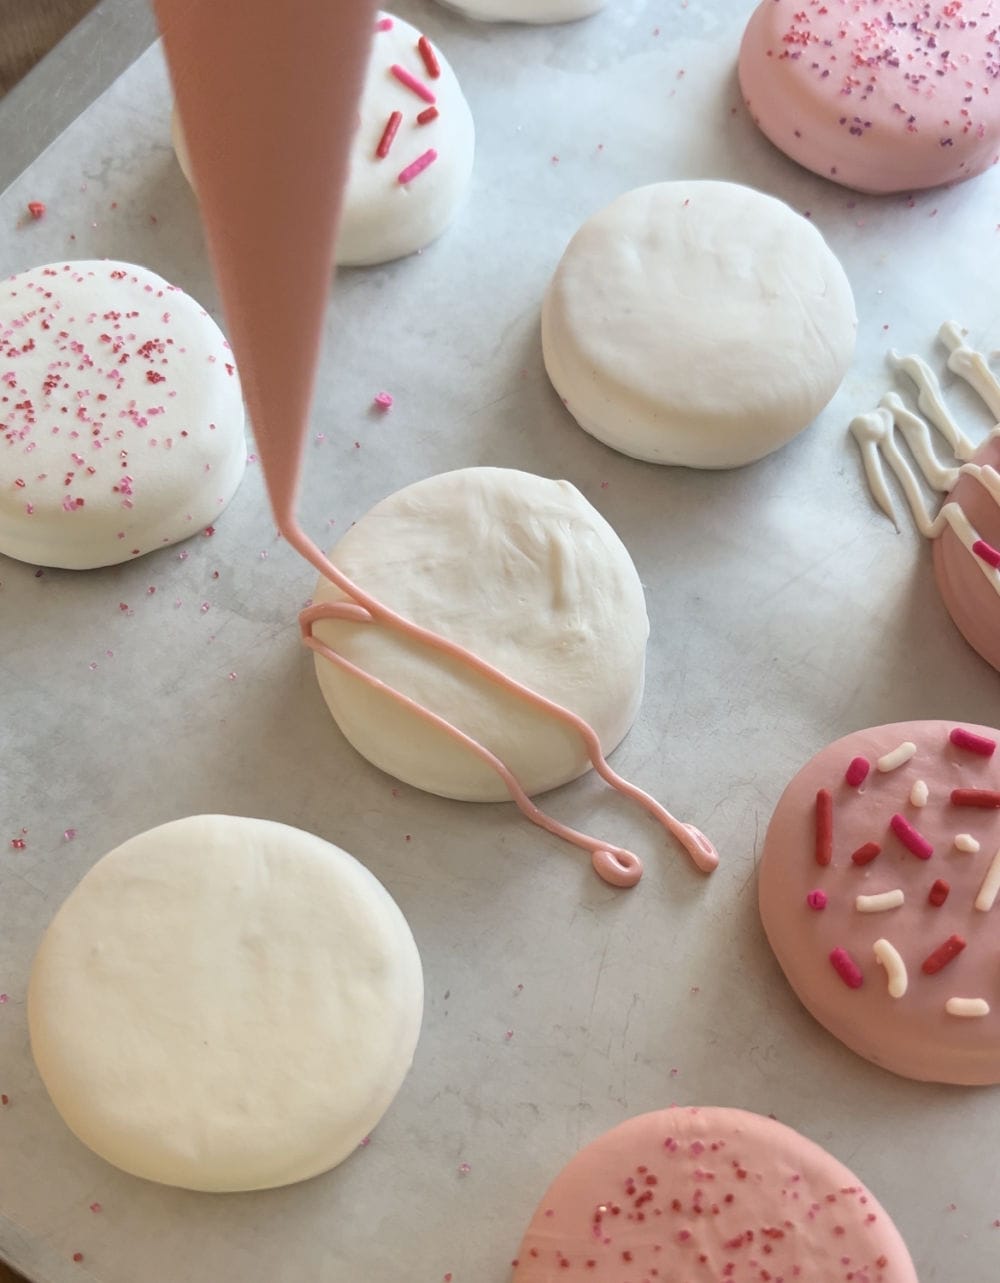 drizzle pink candy coating on white chocolate oreo cookies.